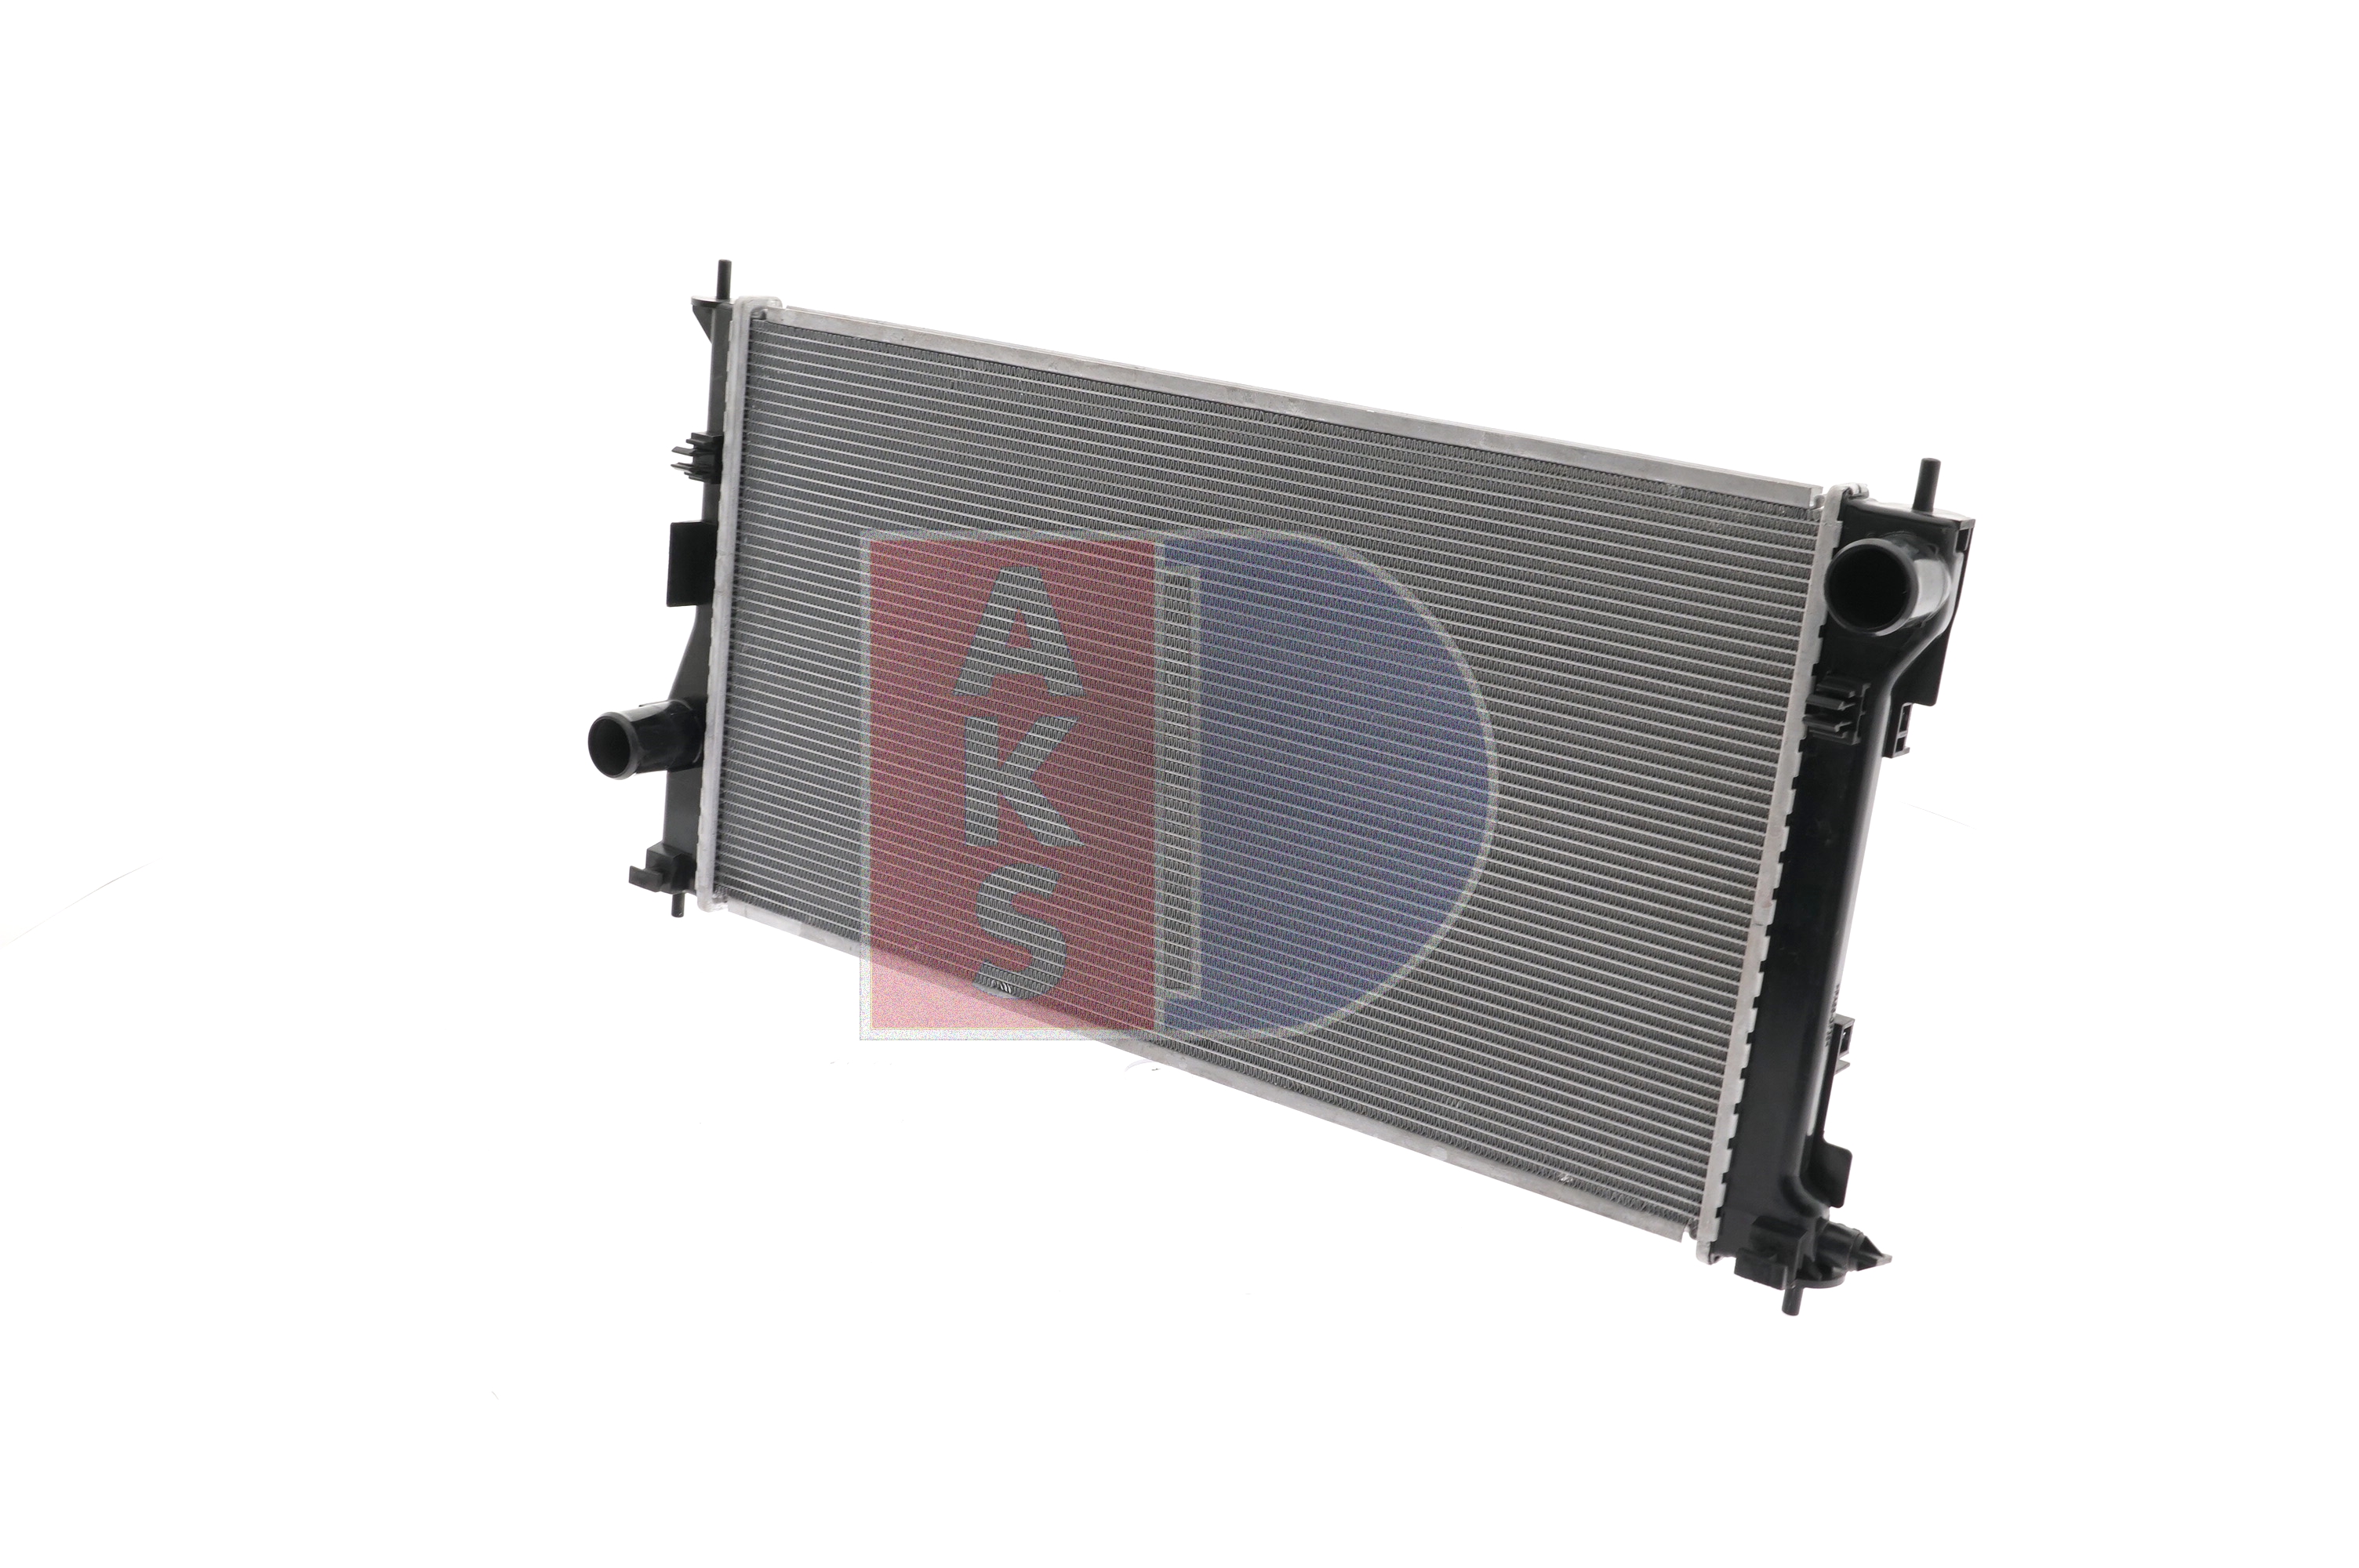 AKS DASIS Aluminium, Plastic, Aluminium, for vehicles with/without air conditioning, 650 x 350 x 16 mm, Manual Transmission, Brazed cooling fins Radiator 210263N buy